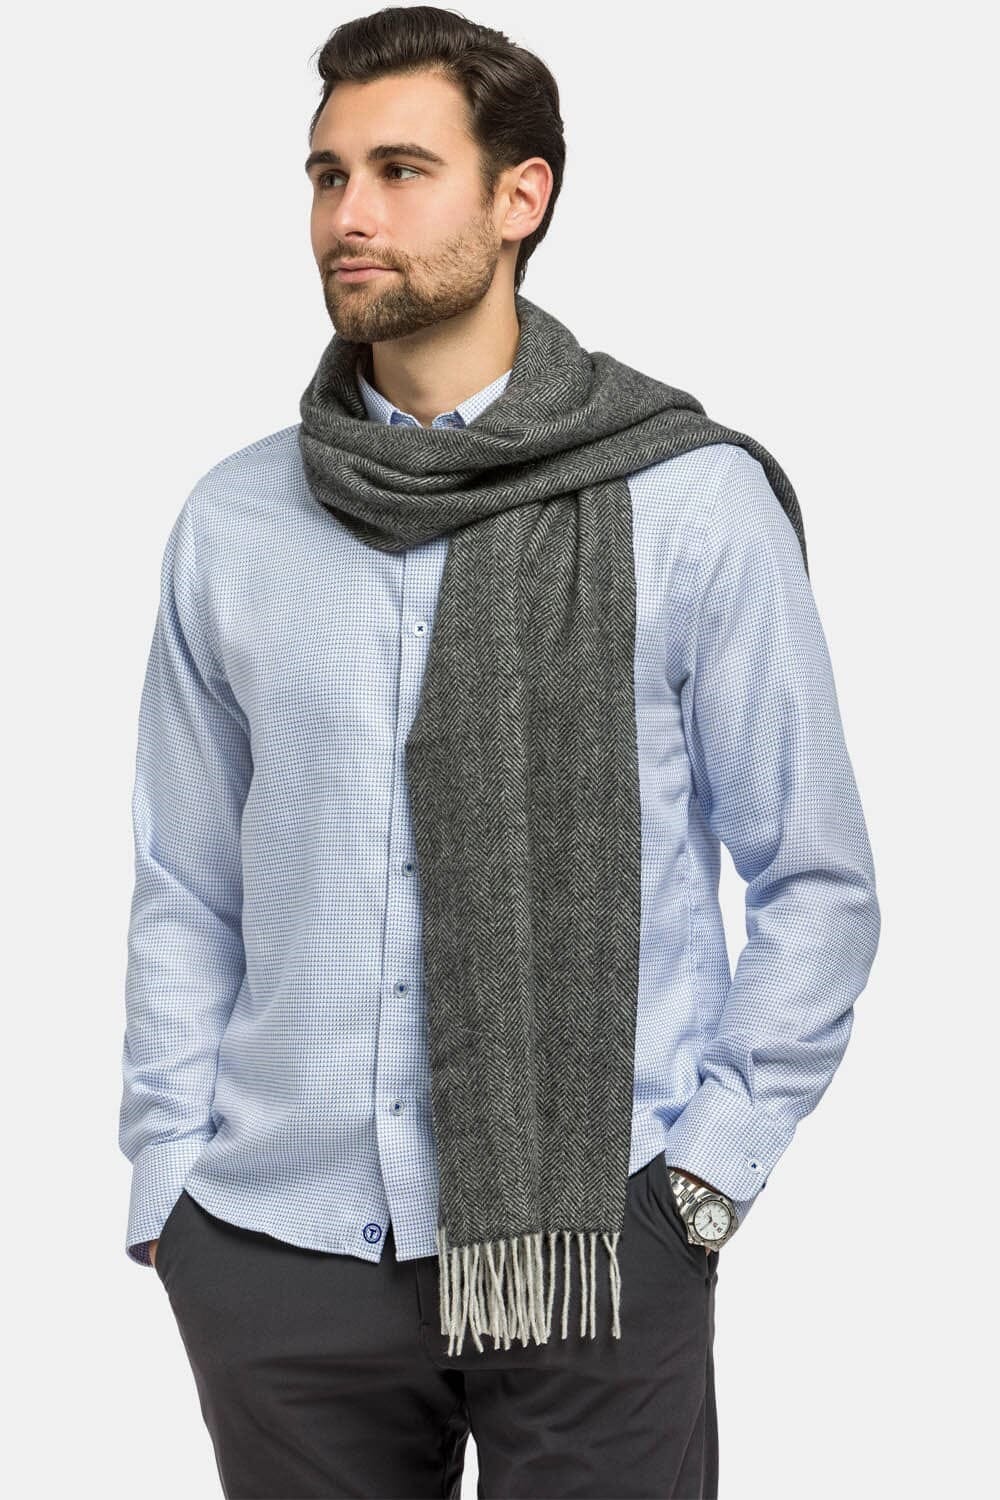 Simple and elegant gifts for men - scarves in pure wool